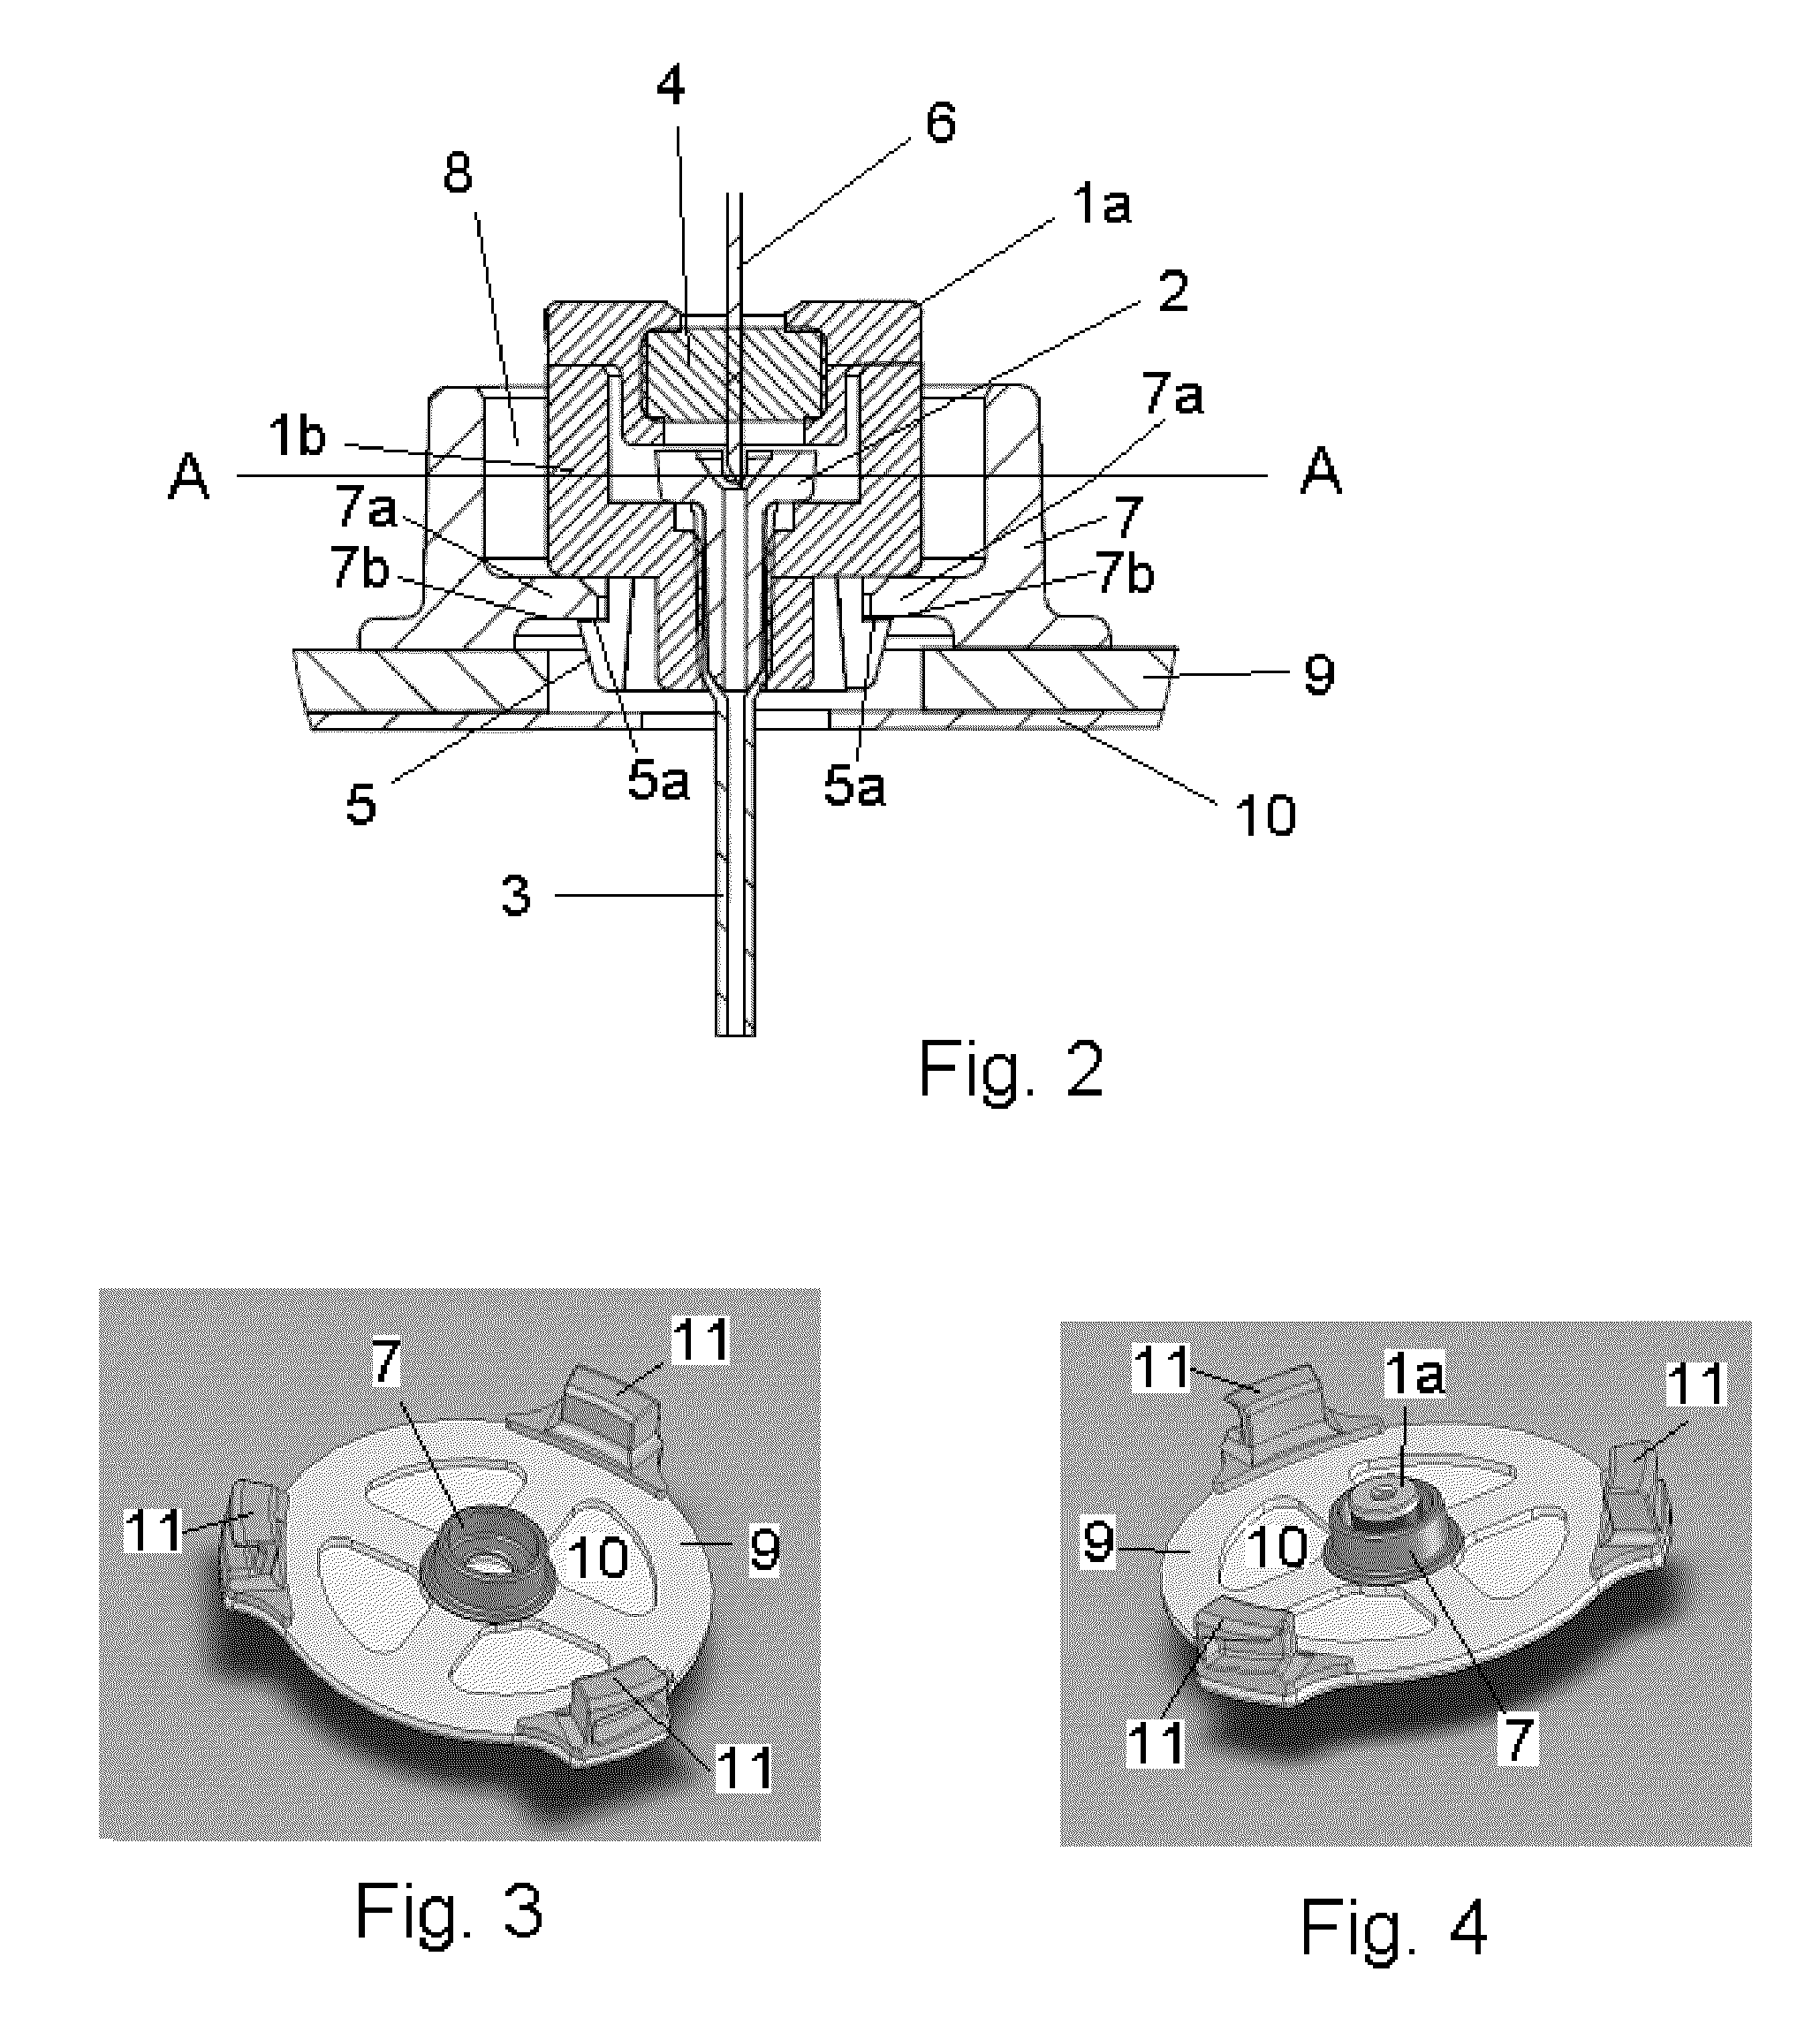 Cannula and Delivery Device